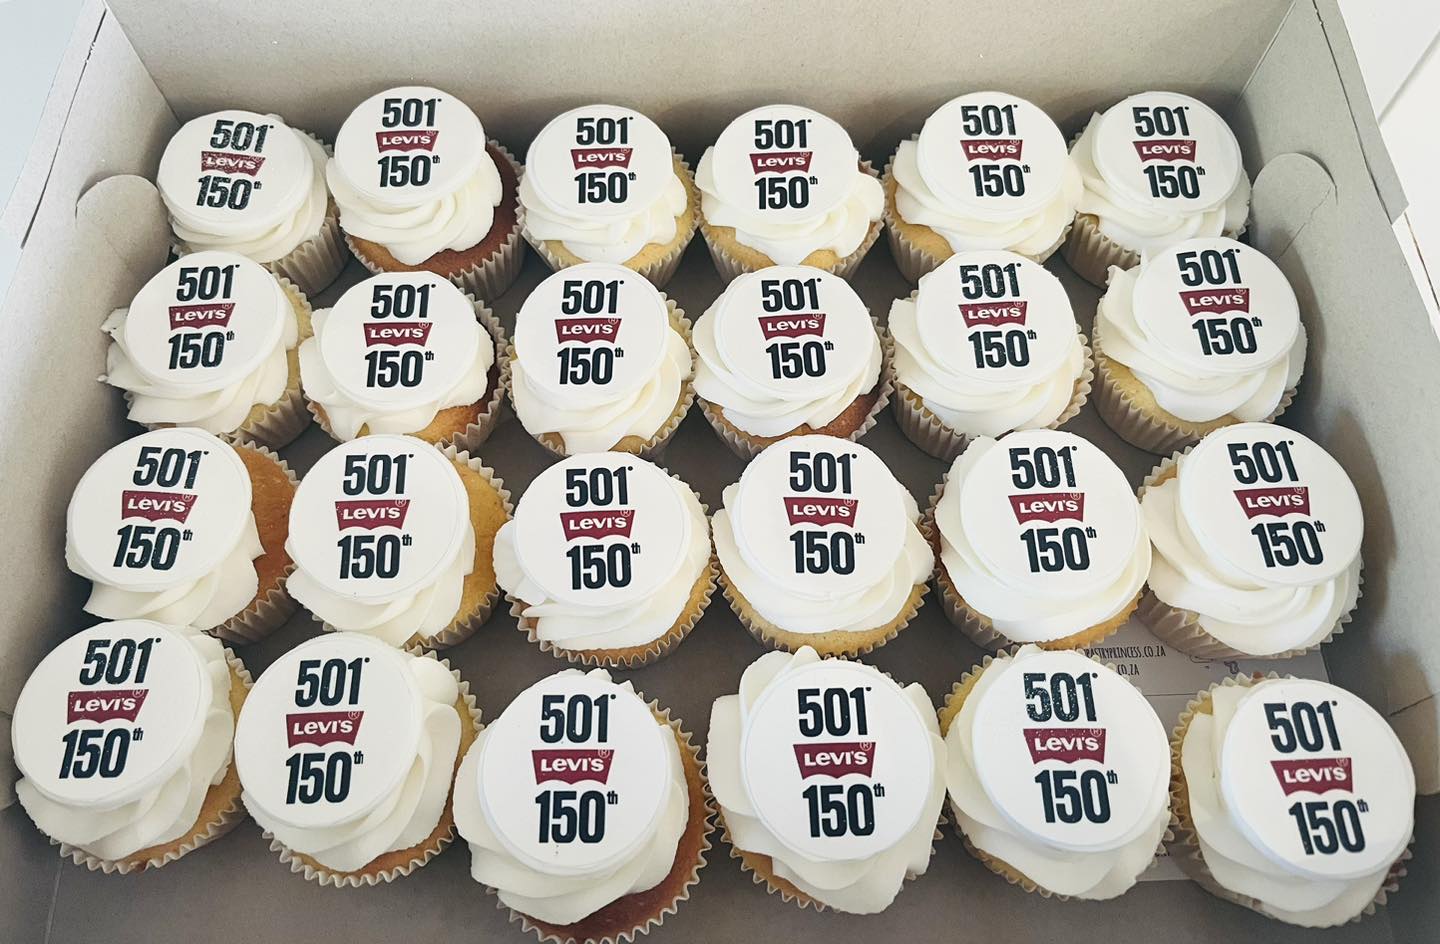 480 corporate cupcakes for Levi's as part of their 150th birthday, corporate cupcakes, cupcakes, cape town cupcakes, novelty cupcakes, birthday cupcakes, southern peninsula, baby shower cupcakes